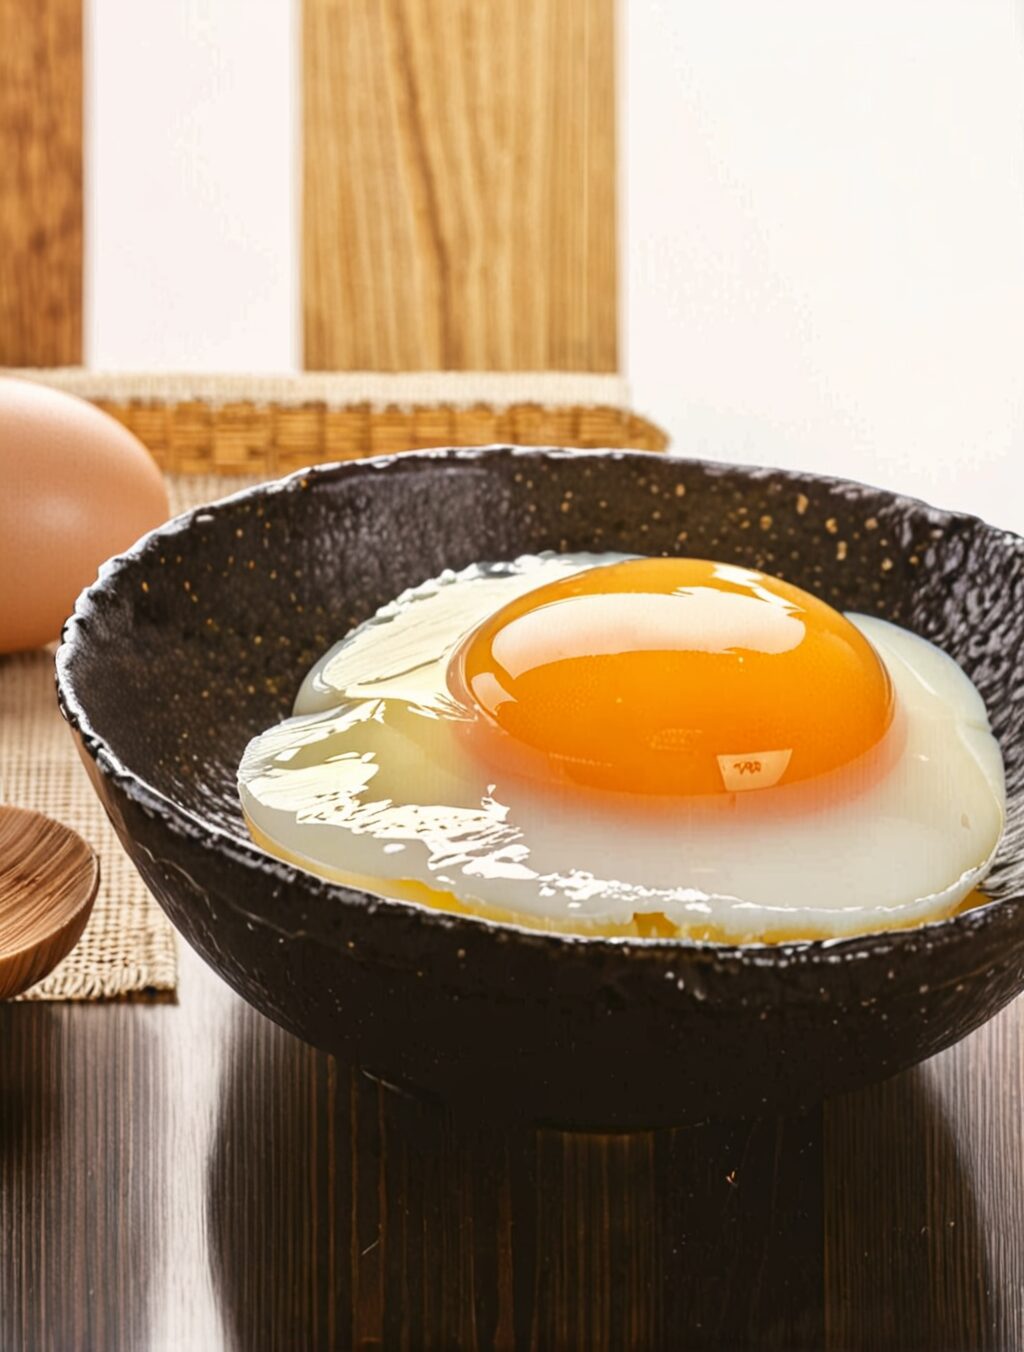 why can you eat raw eggs in japan